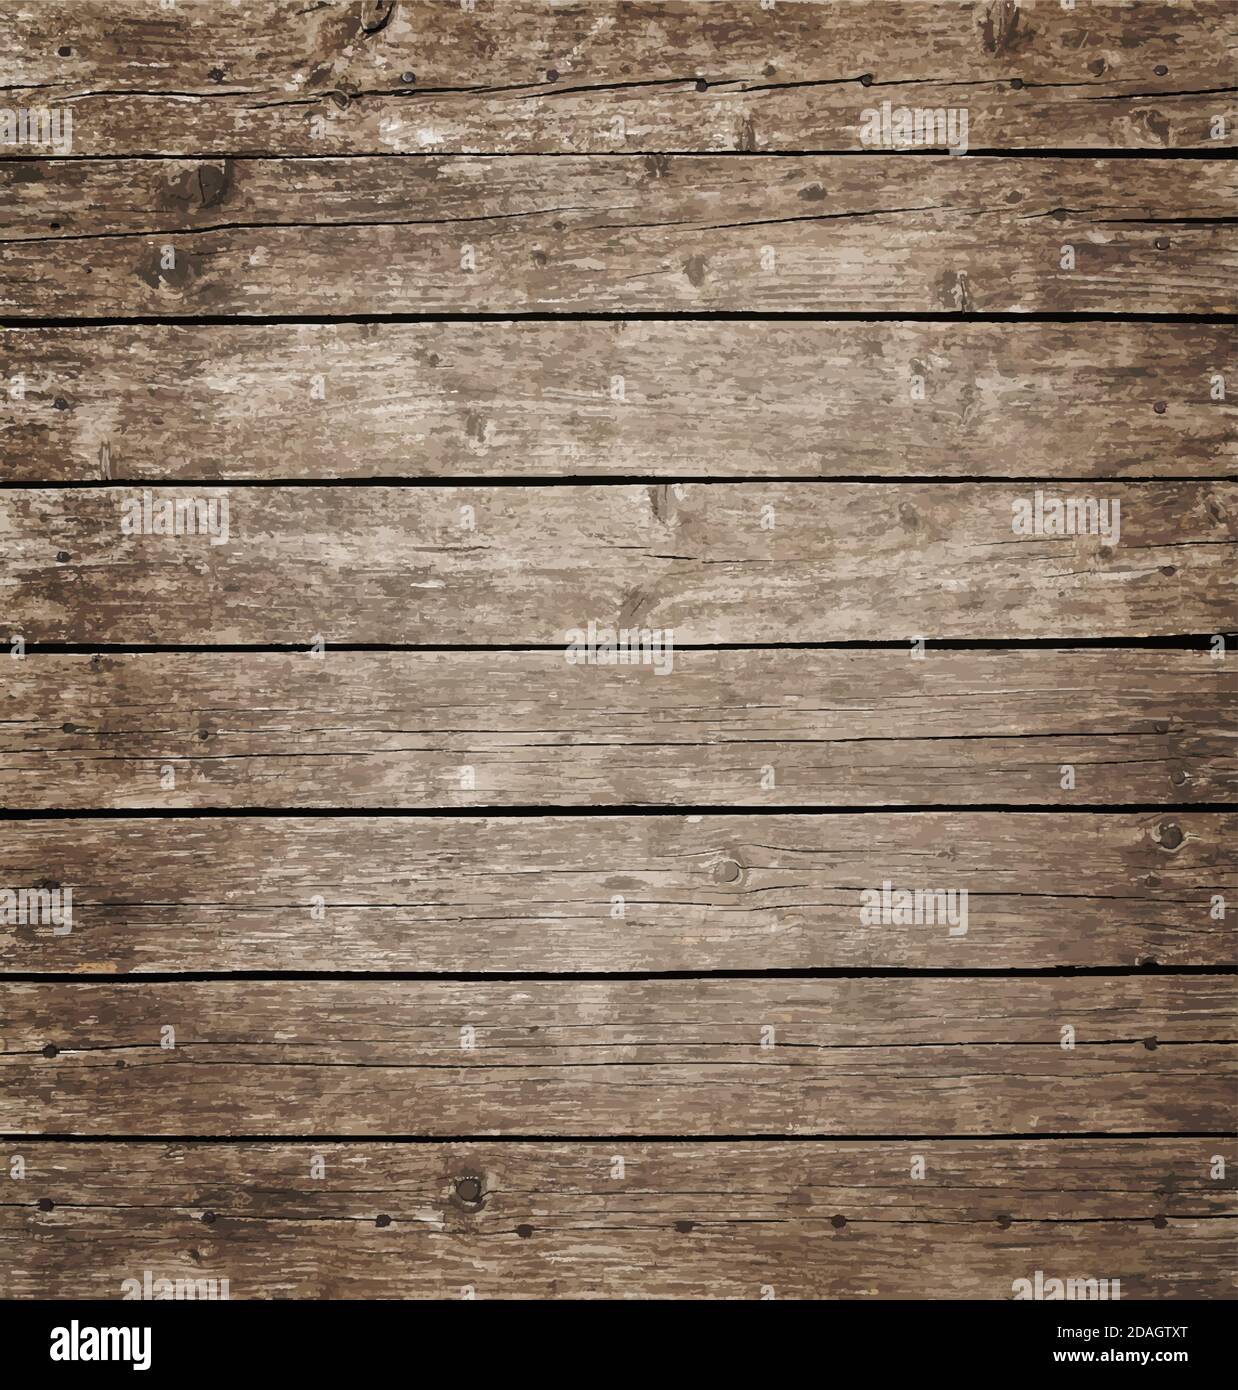 Vector illustration background texture of grunge weathered vintage brown knotty wooden planks Stock Vector